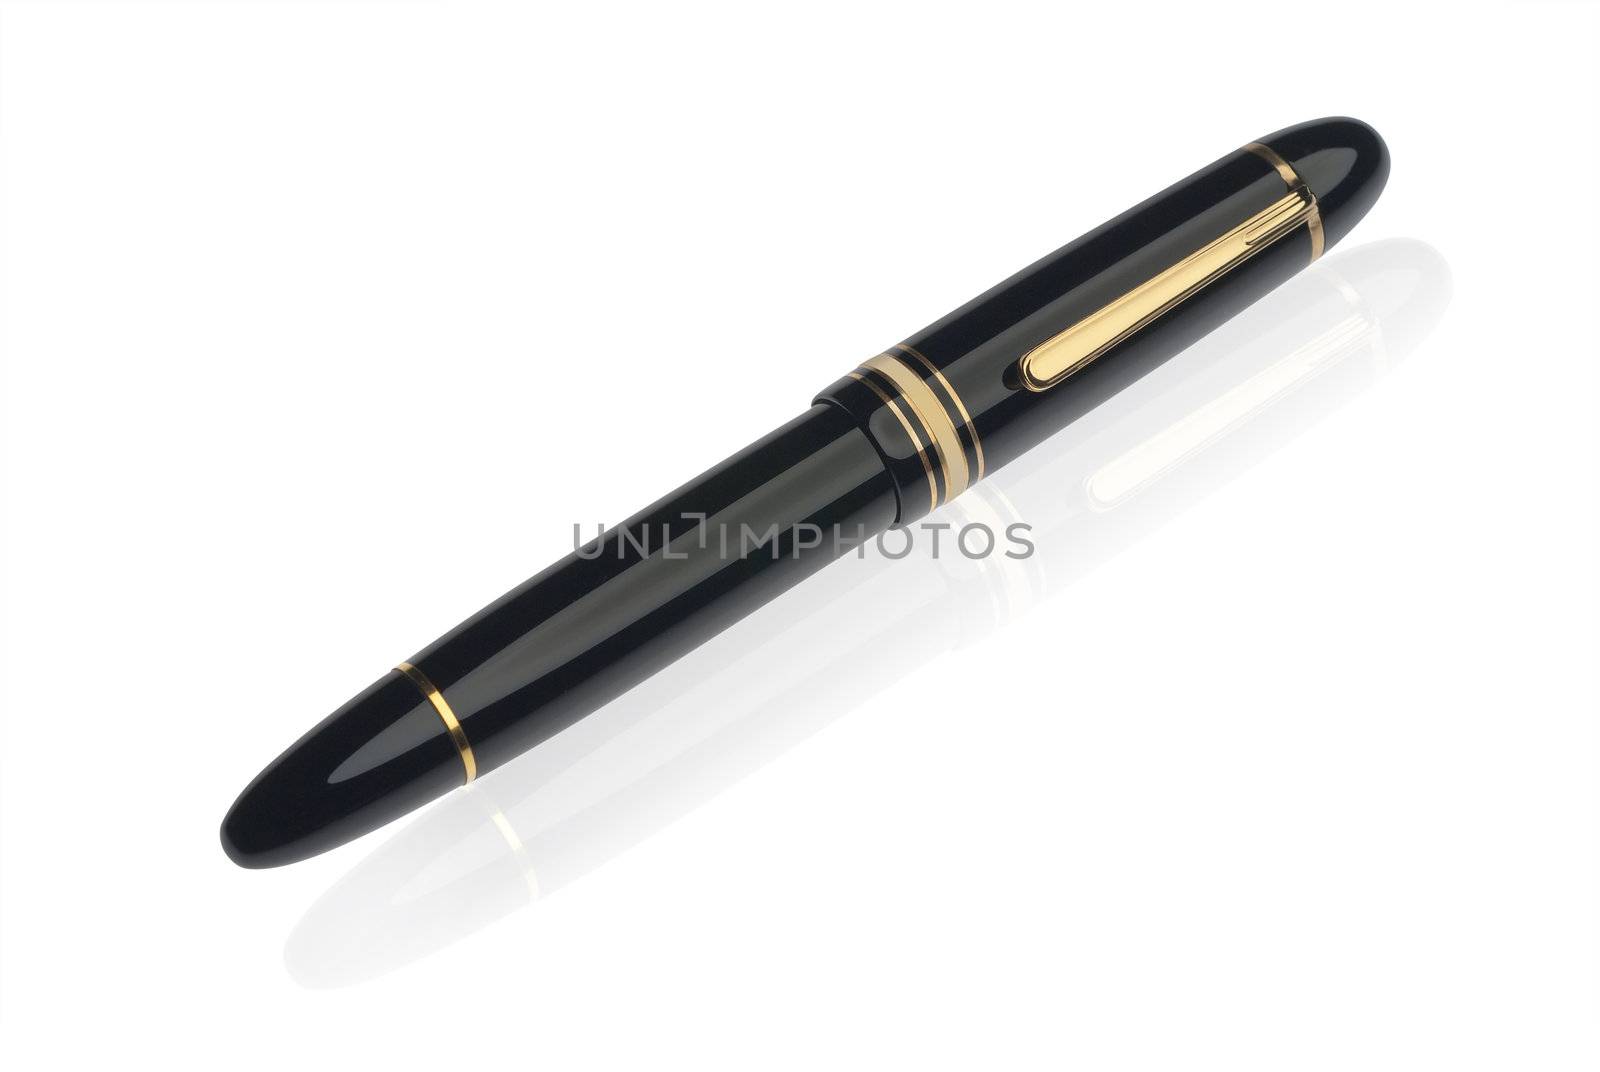 Closed fountain pen on white with clipping path